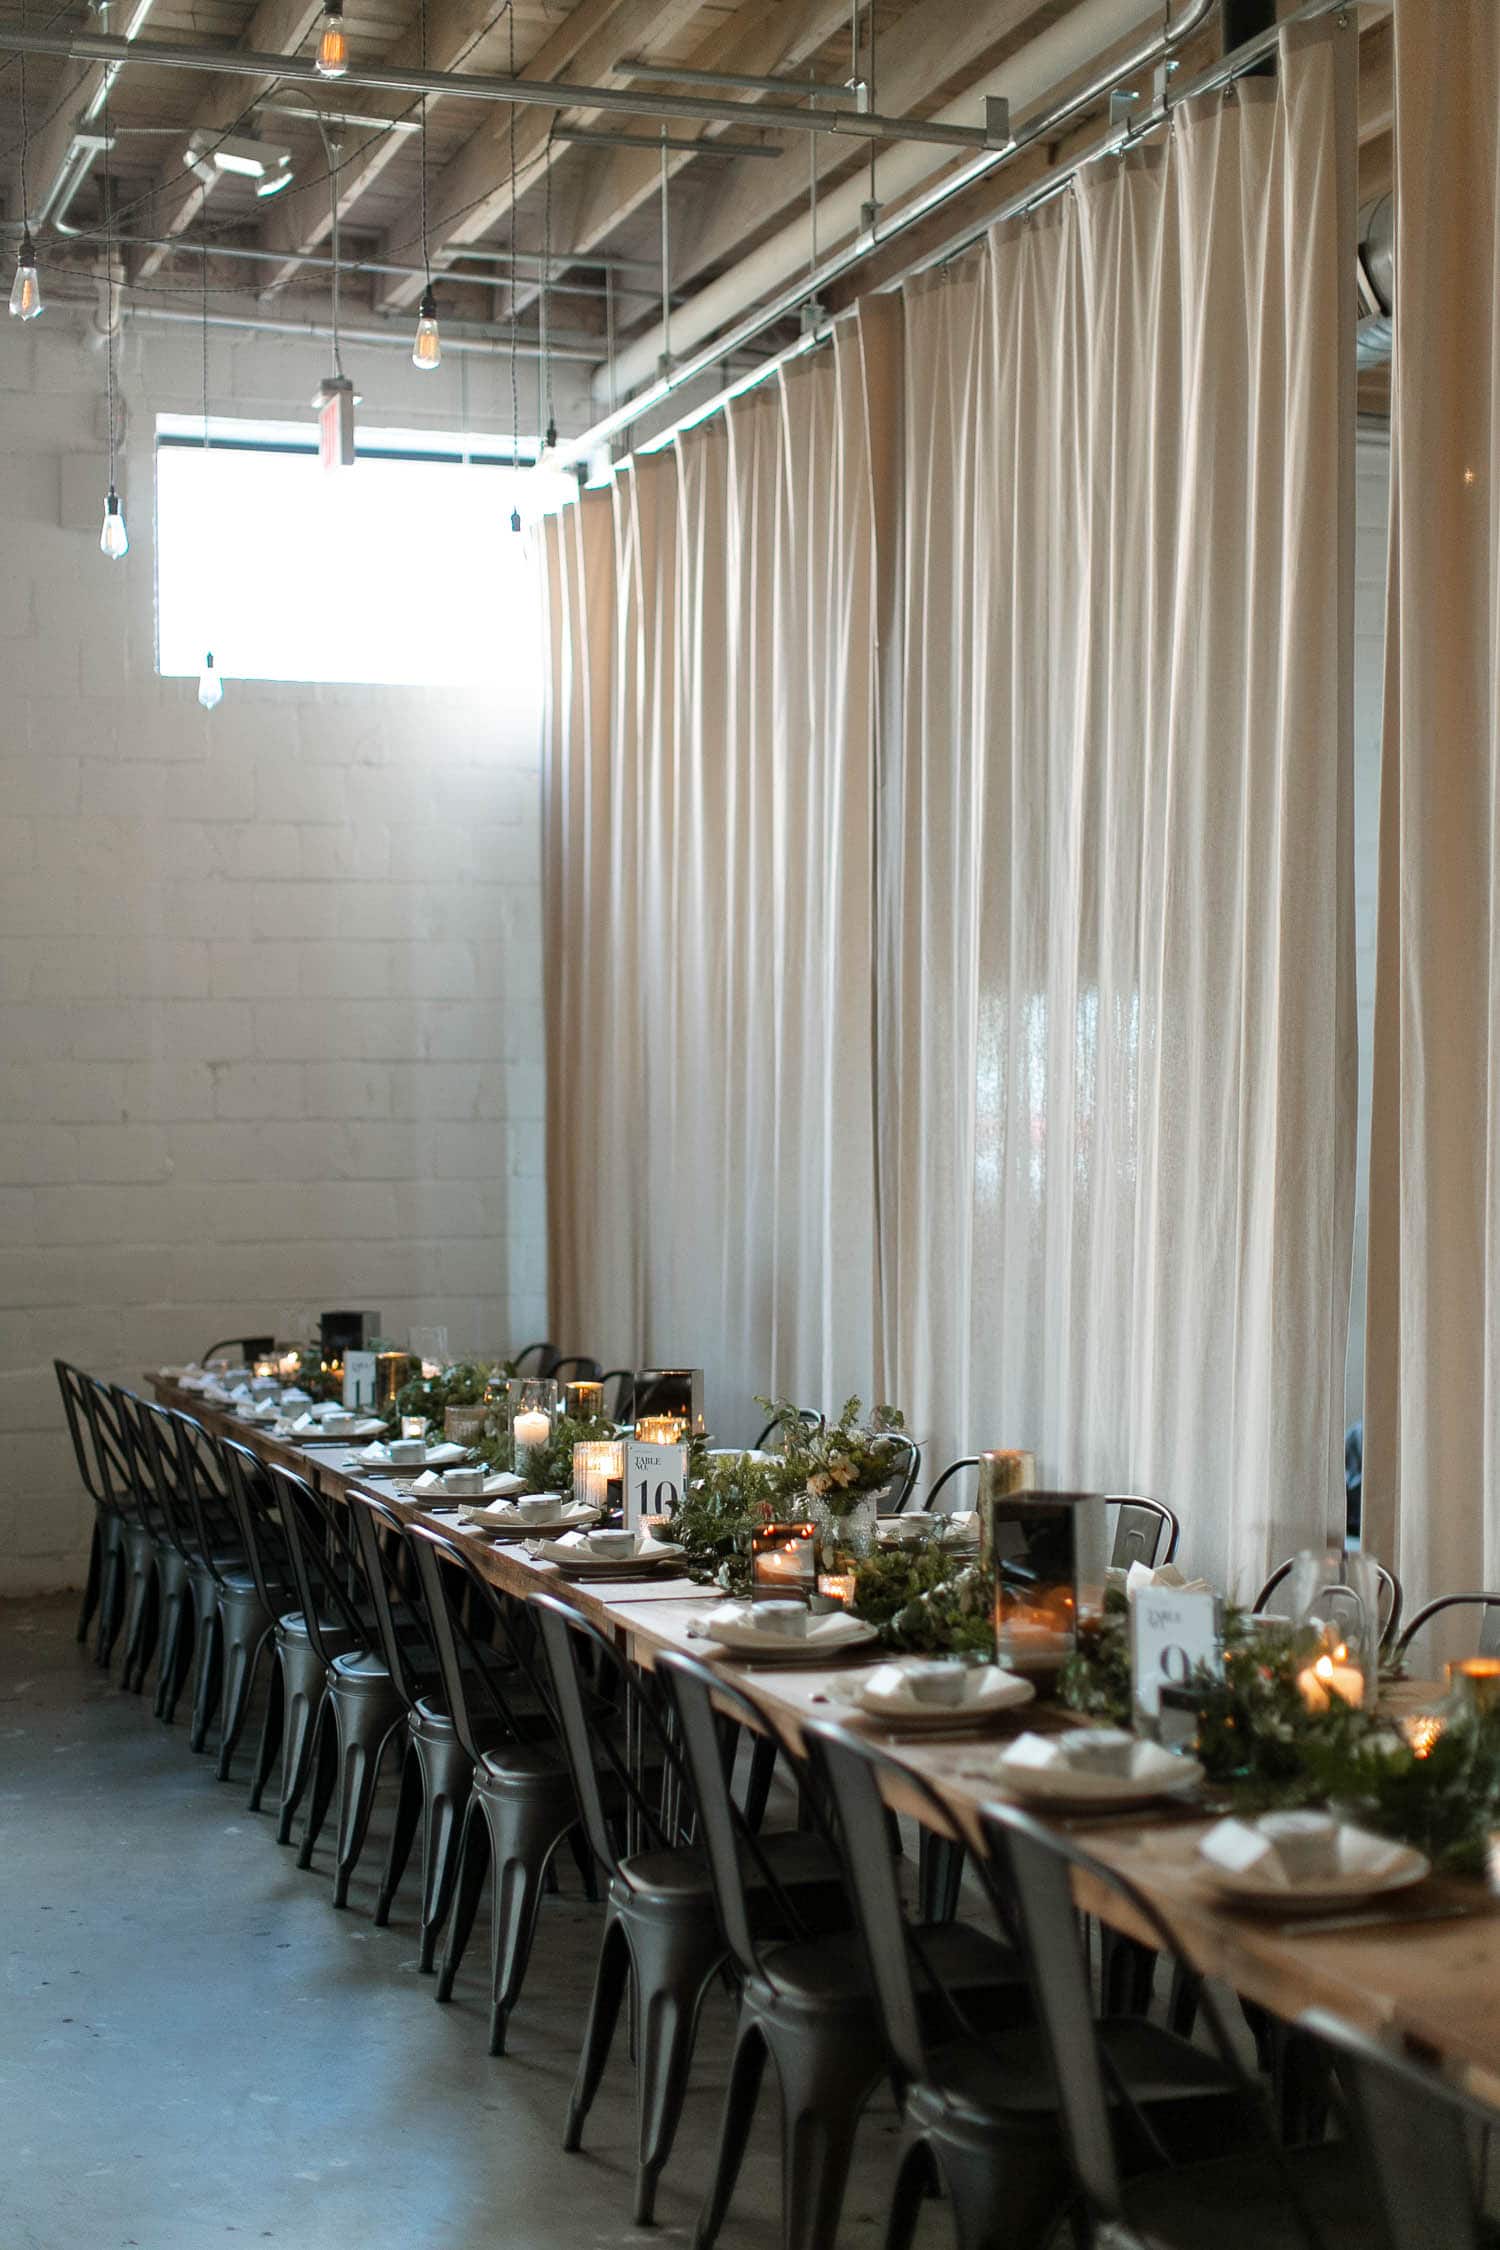 Wide angle of a wedding reception which has white and greenery decor all around. There are white walls, concrete floors, modern farm tables, greenery and candles on the tables. The sweetheart table has white flowers running down to the floor.